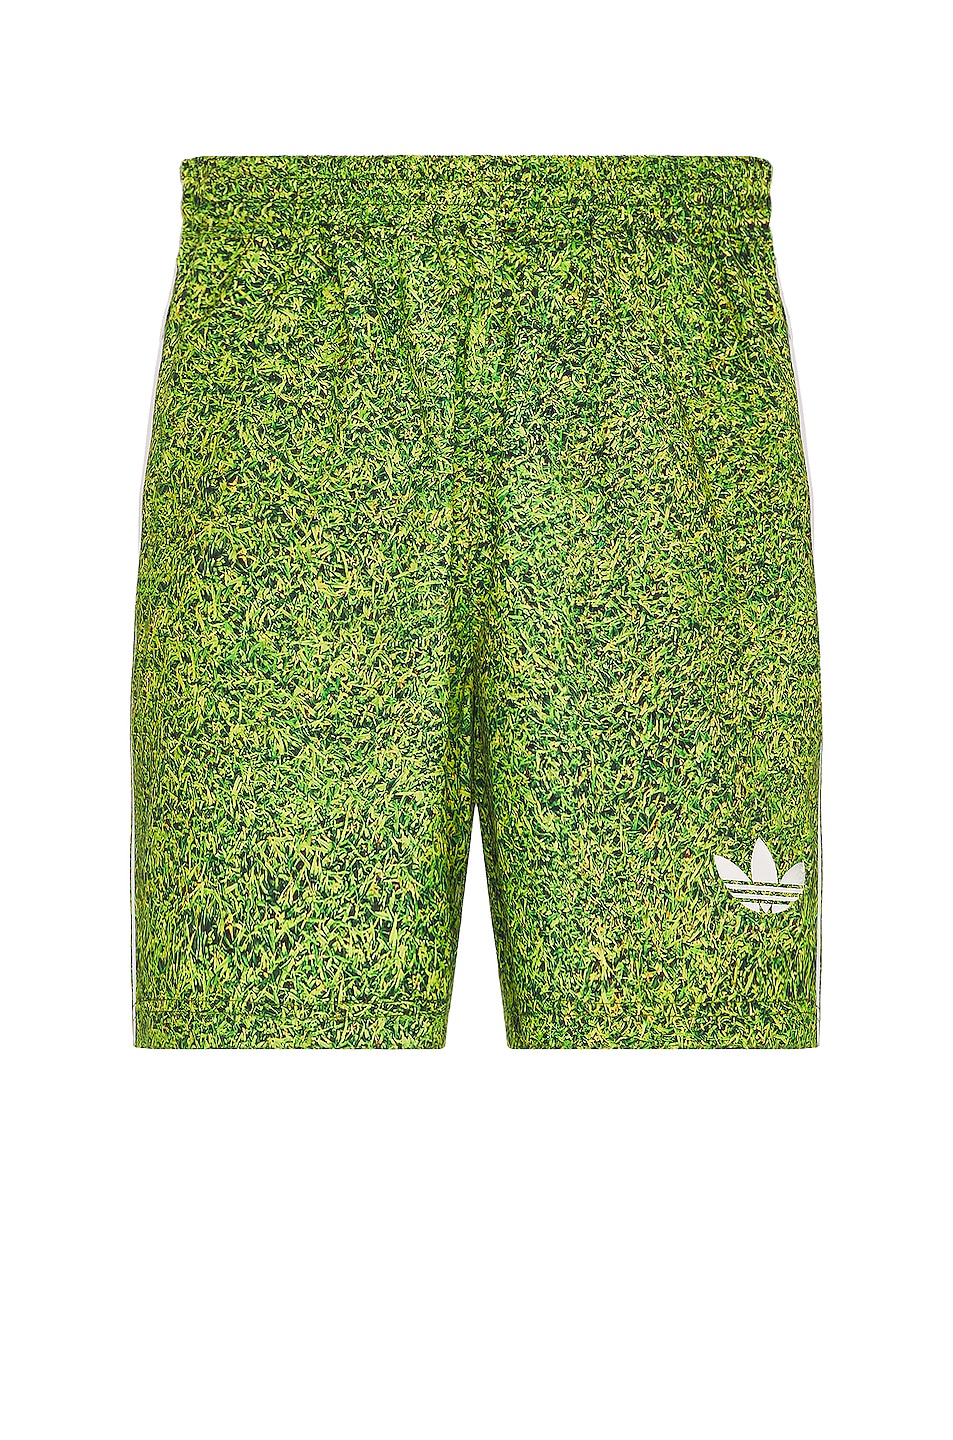 Image 1 of adidas x Kerwin Frost adidas Originals x Kerwin Frost Shorts in Grass